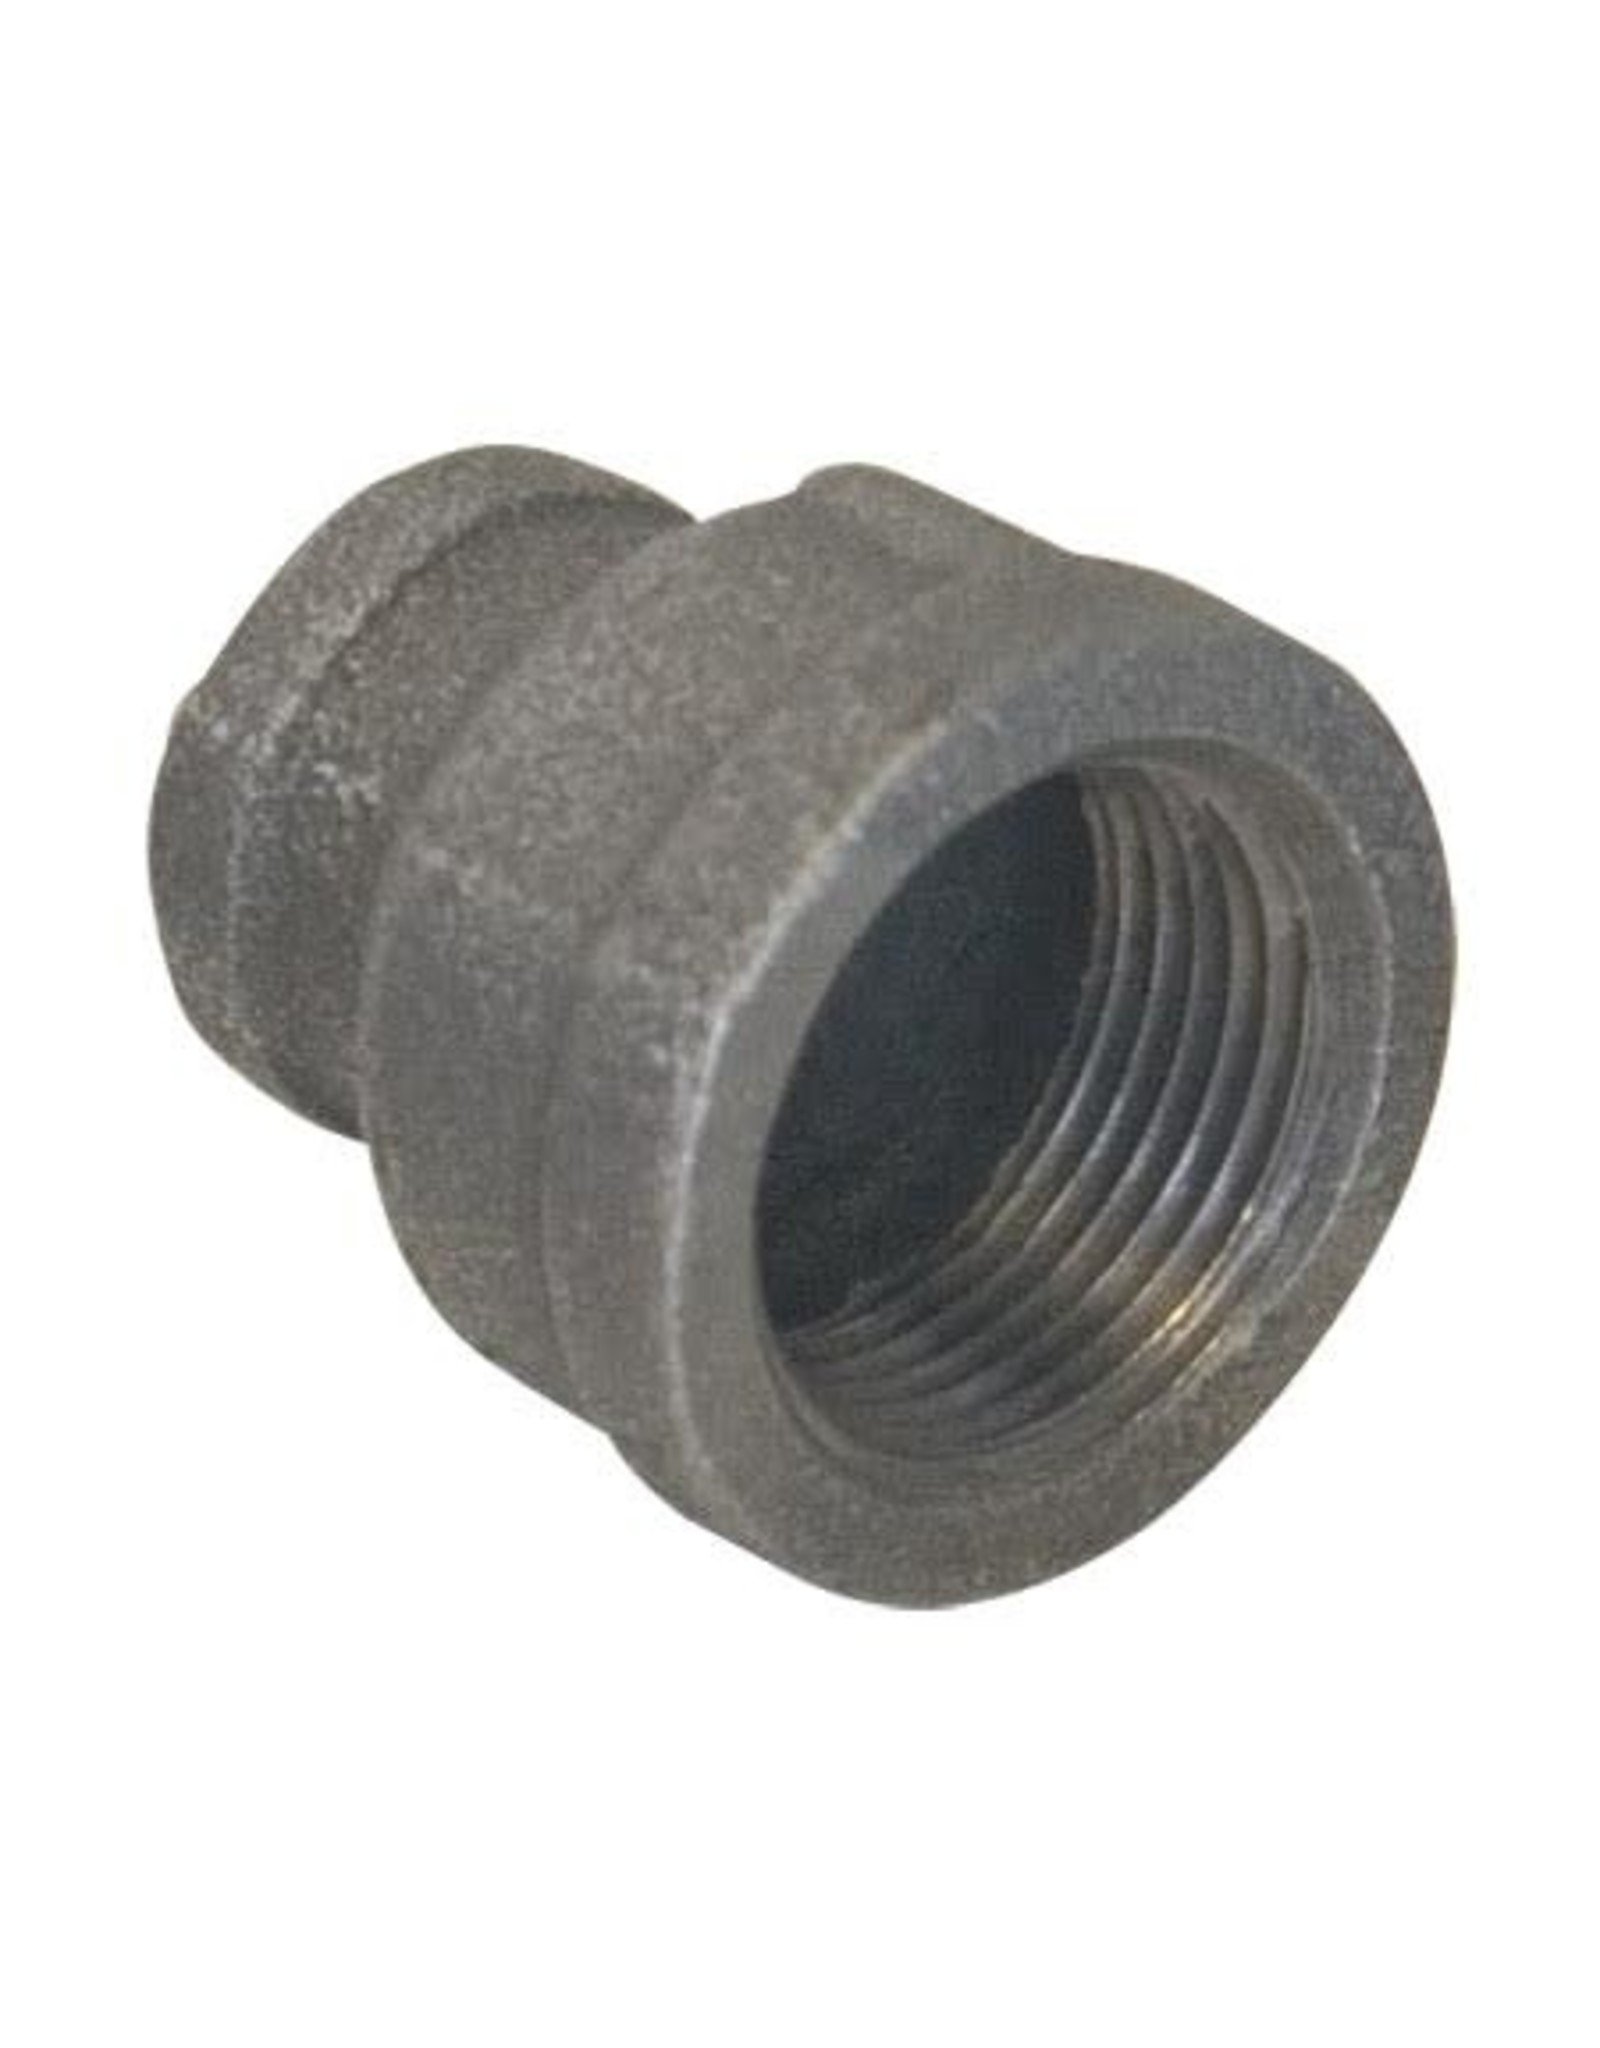 BLACK MALLEABLE BELL REDUCER